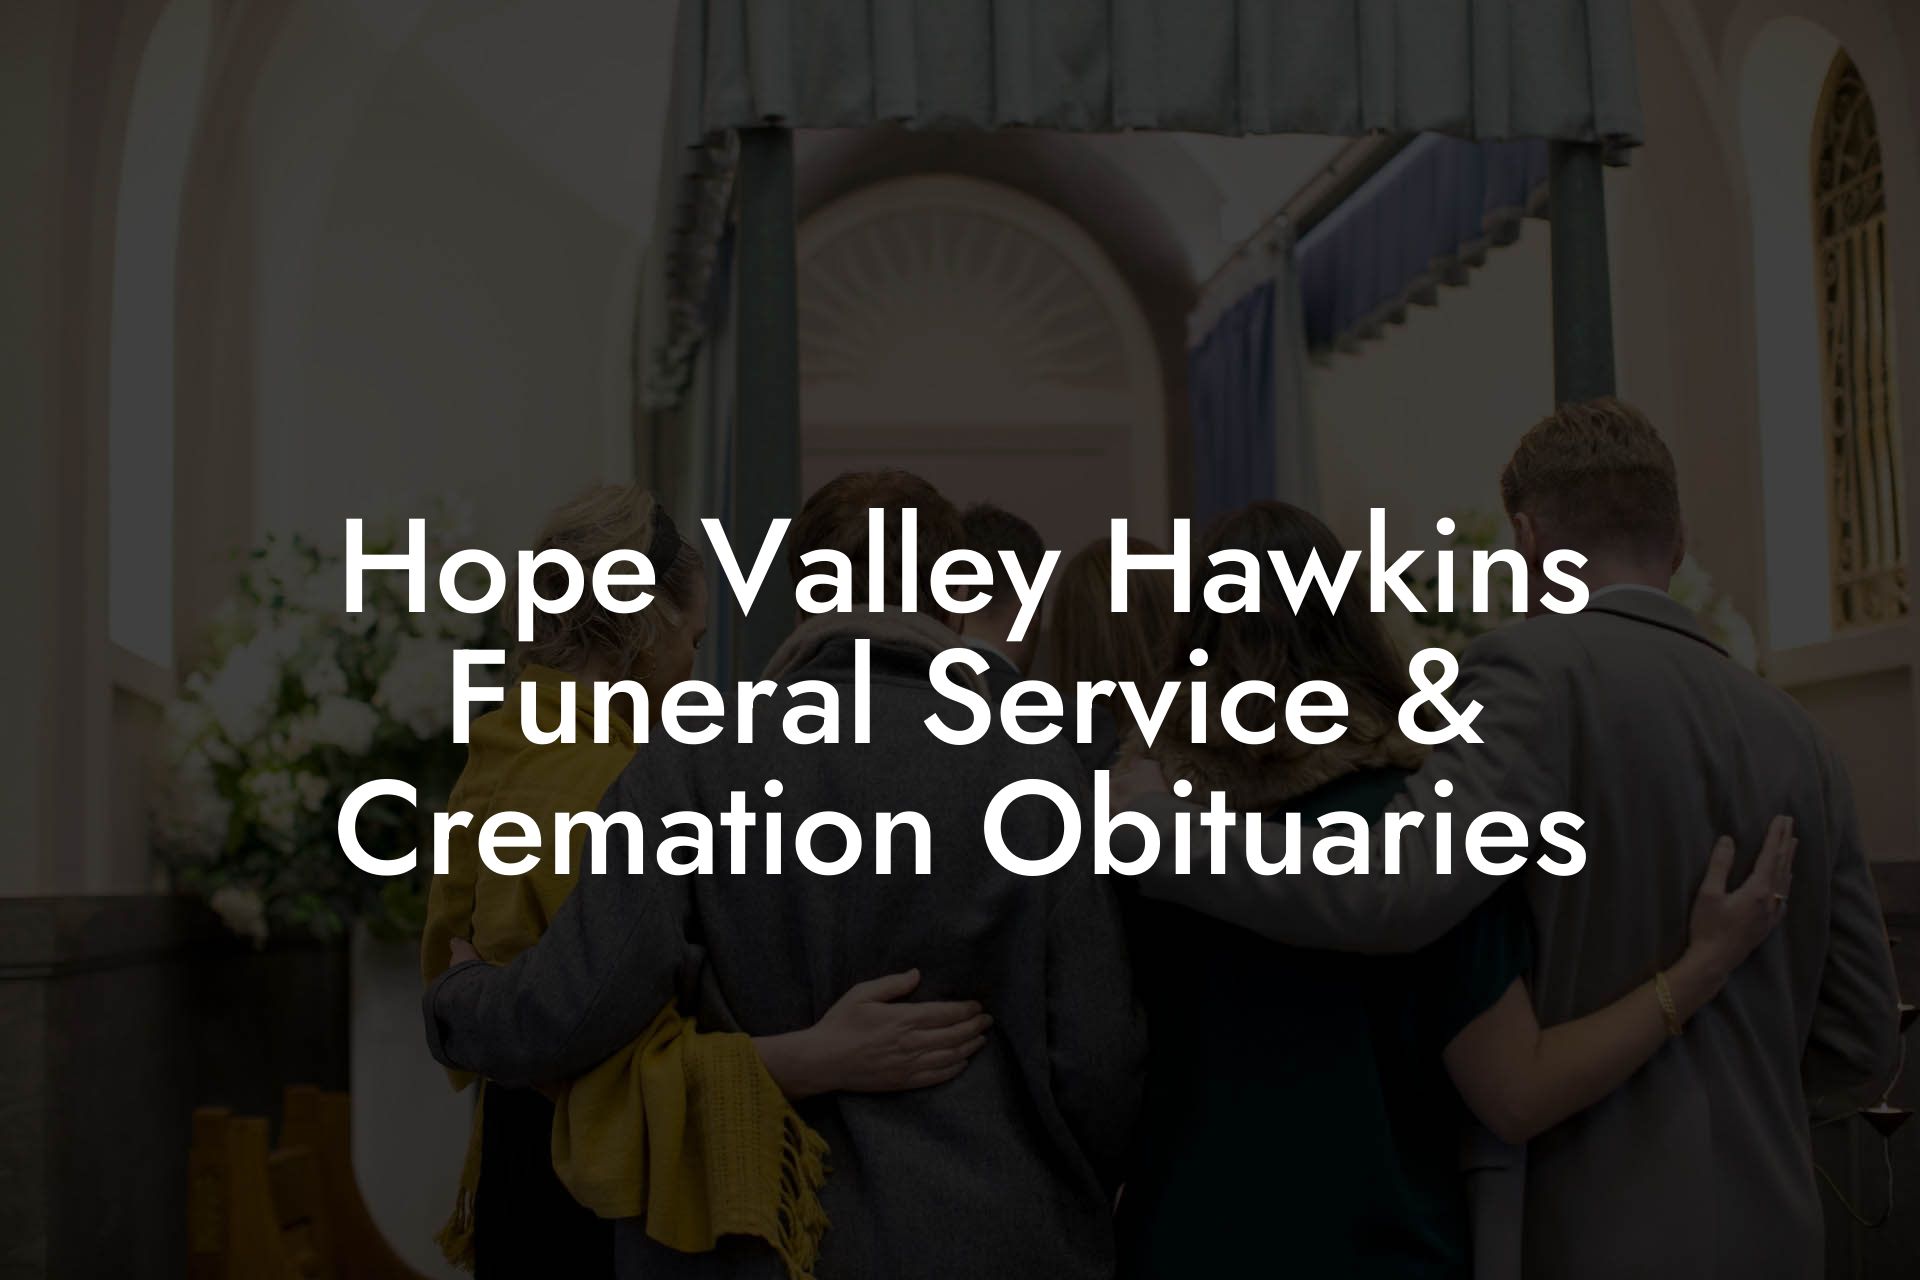 Hope Valley Hawkins Funeral Service & Cremation Obituaries